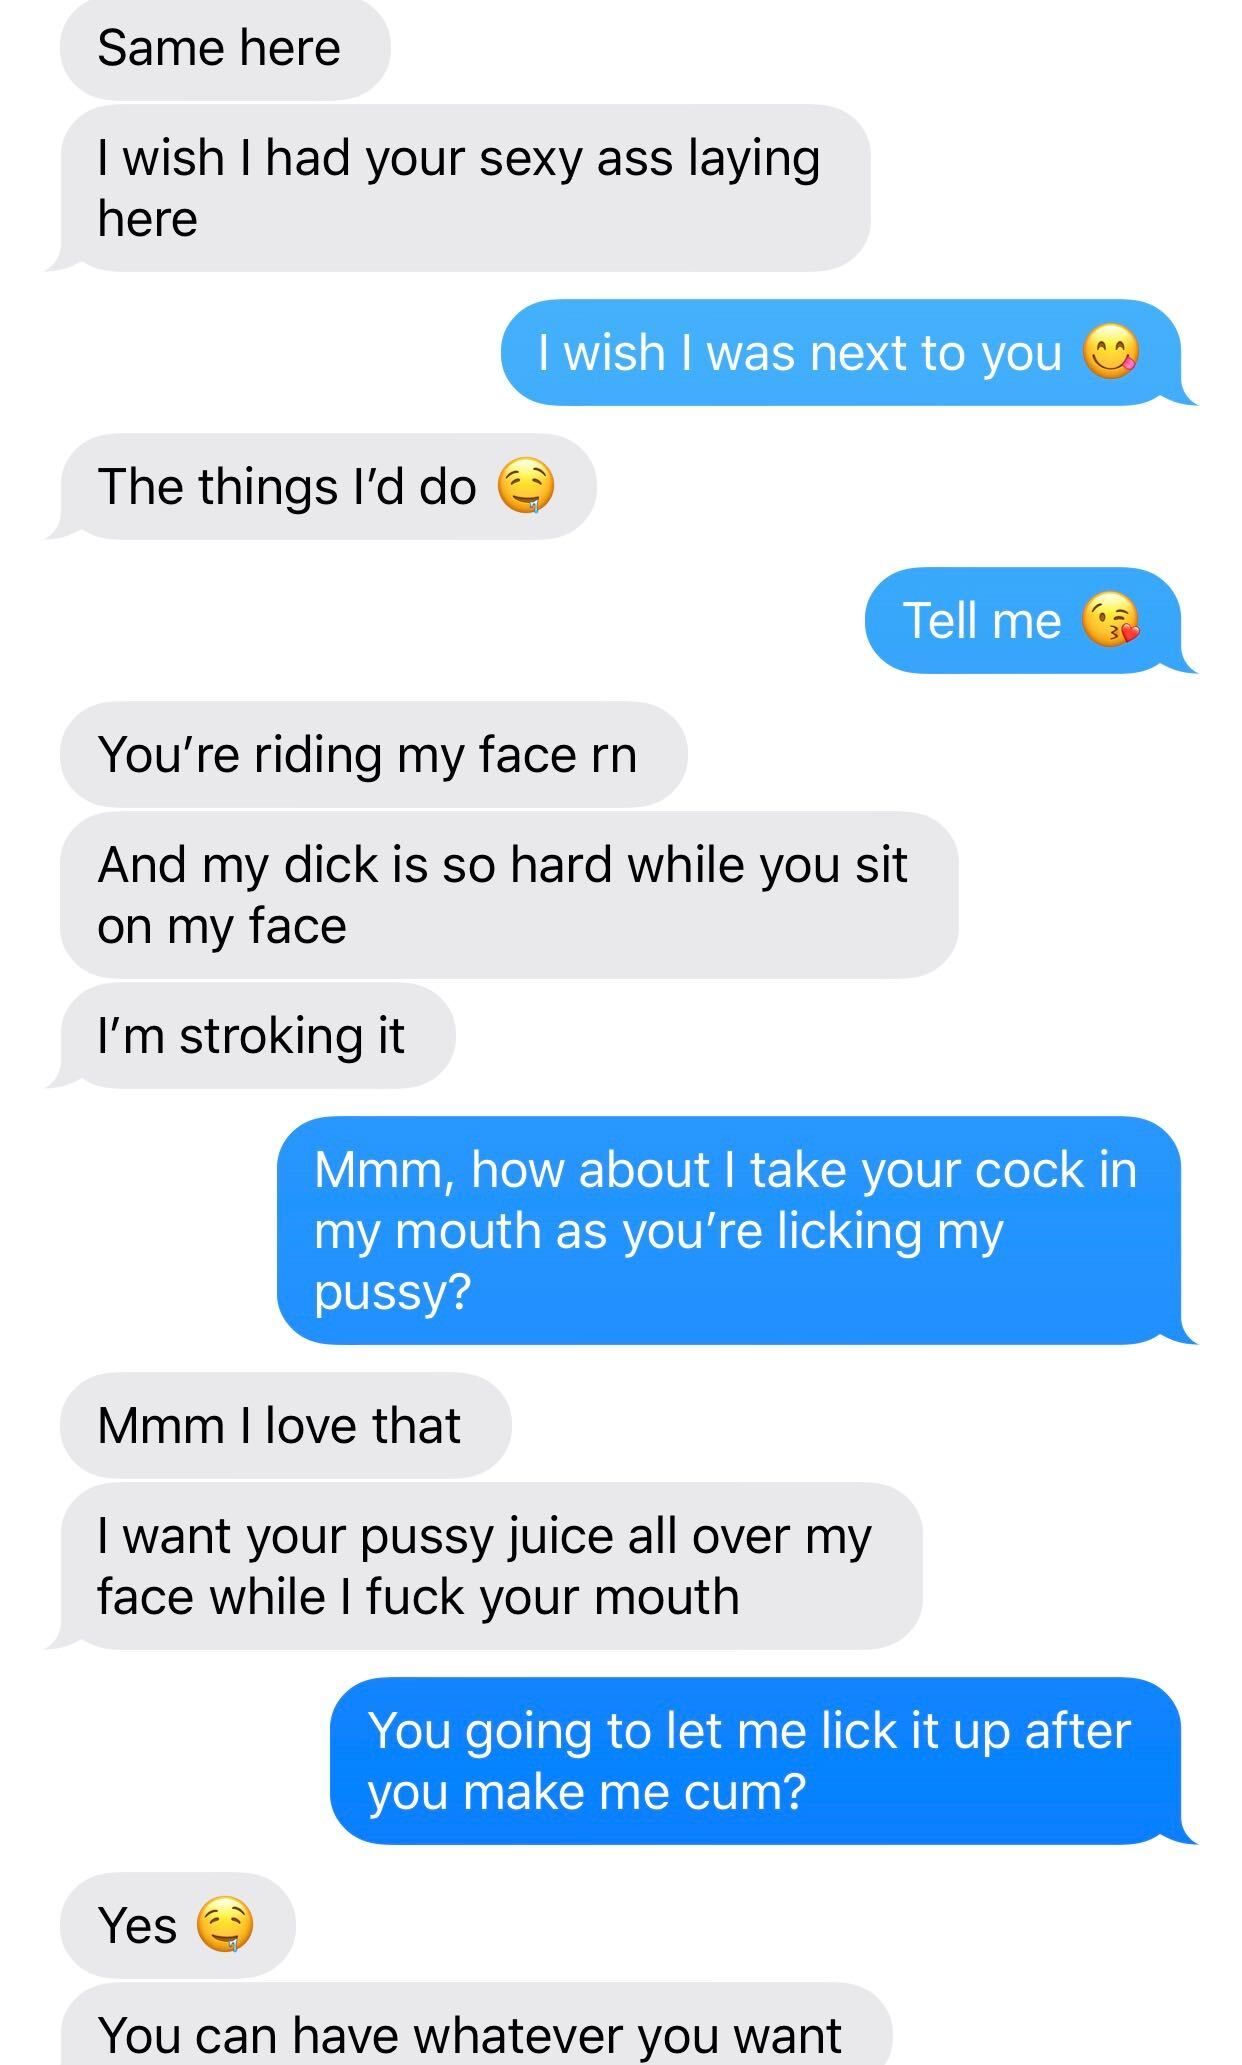 I have a girlfriend who always sends me sexy videos